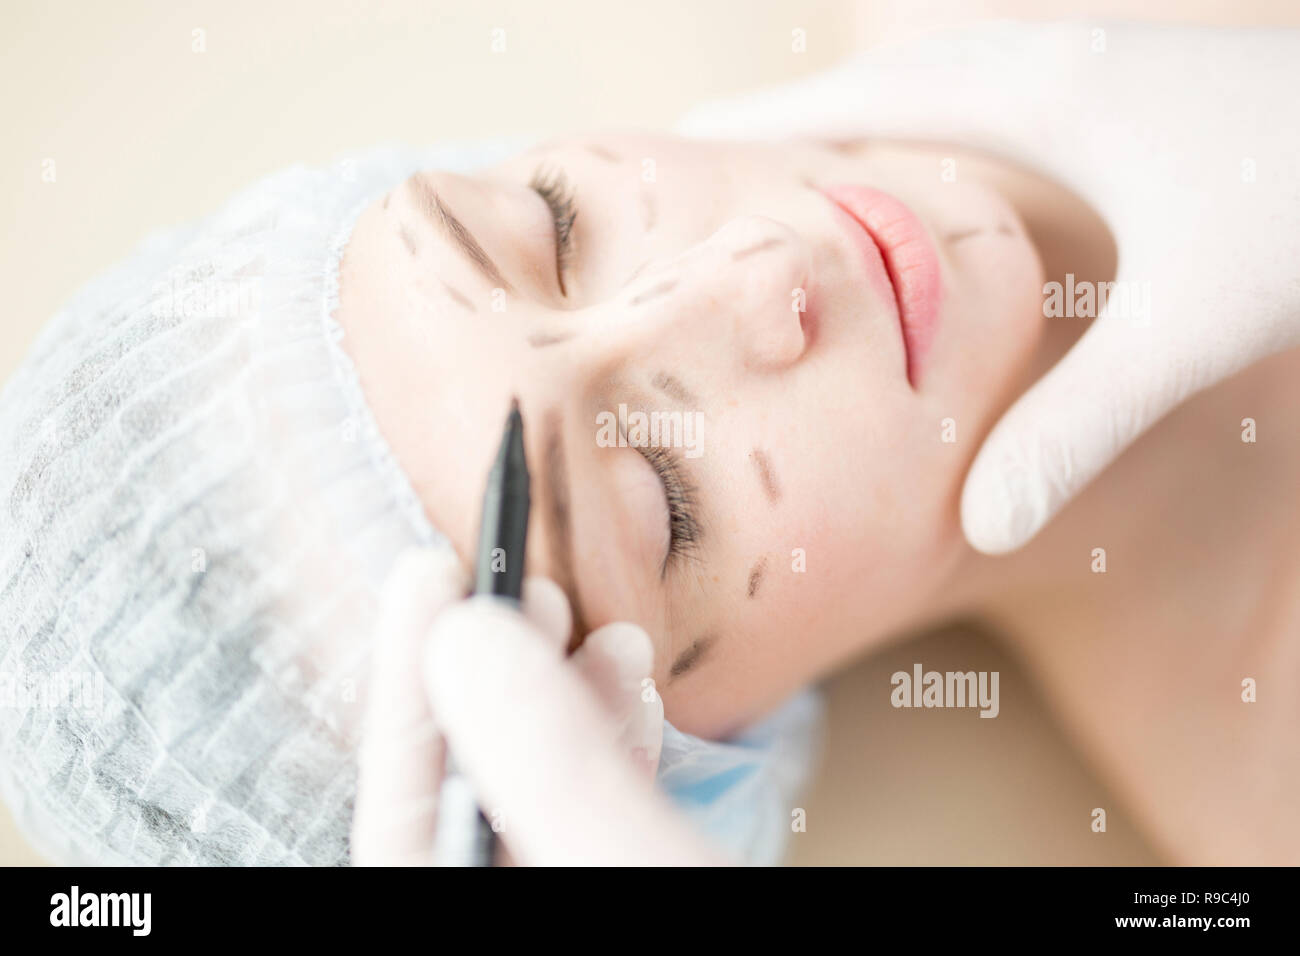 Making marks on face Stock Photo